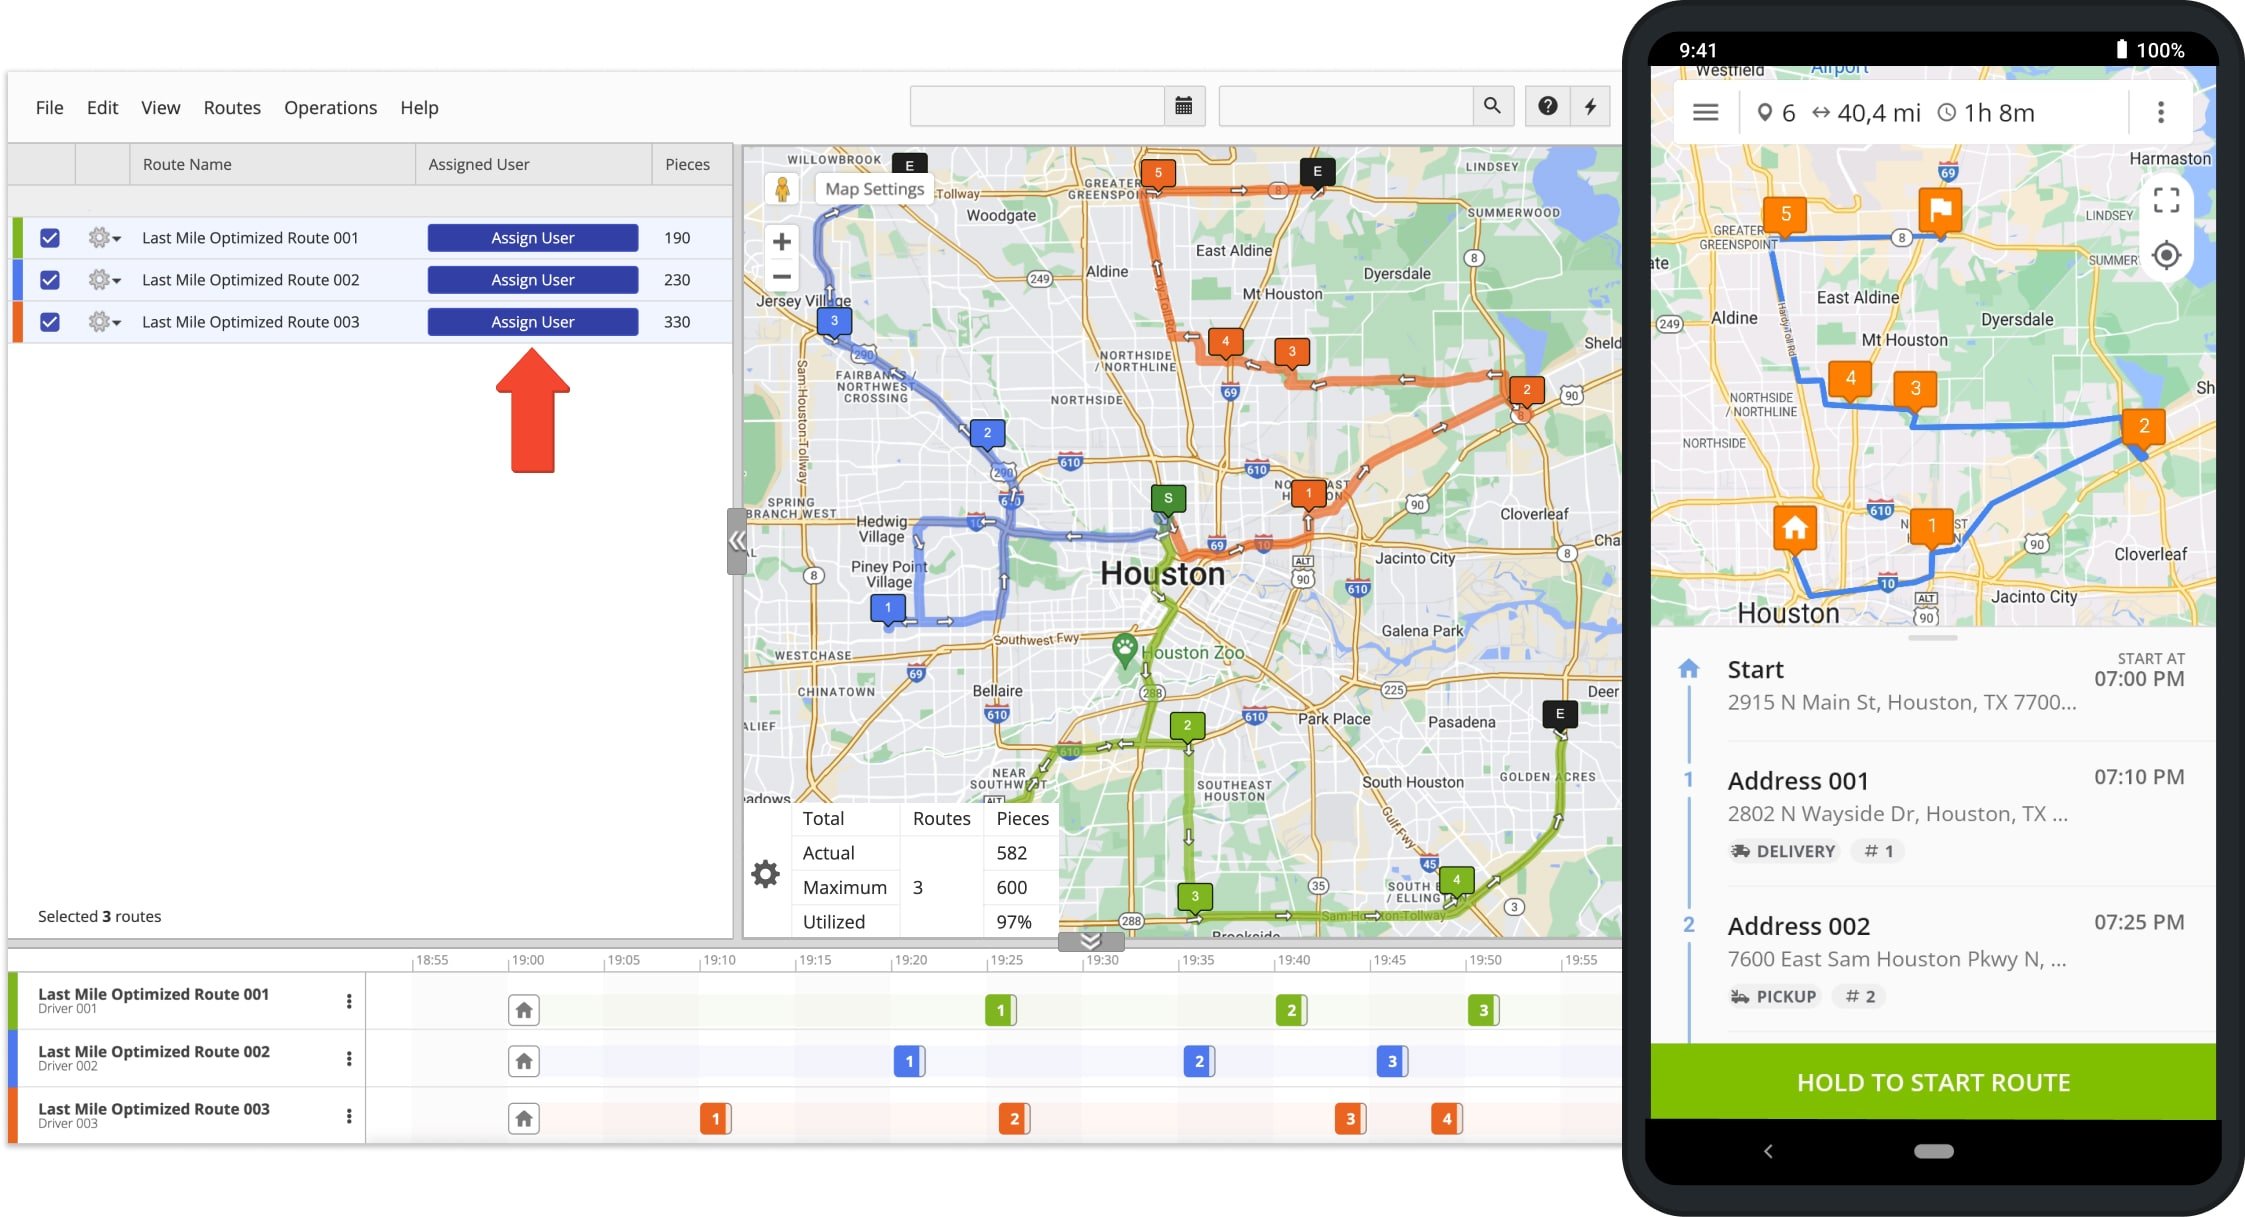 Route4Me enables you to dispatch routes to your drivers in real-time. Specifically, you can dispatch scheduled routes from the Web Platform to Route4Me's Android Route Planner and iOS Route Planner mobile apps.